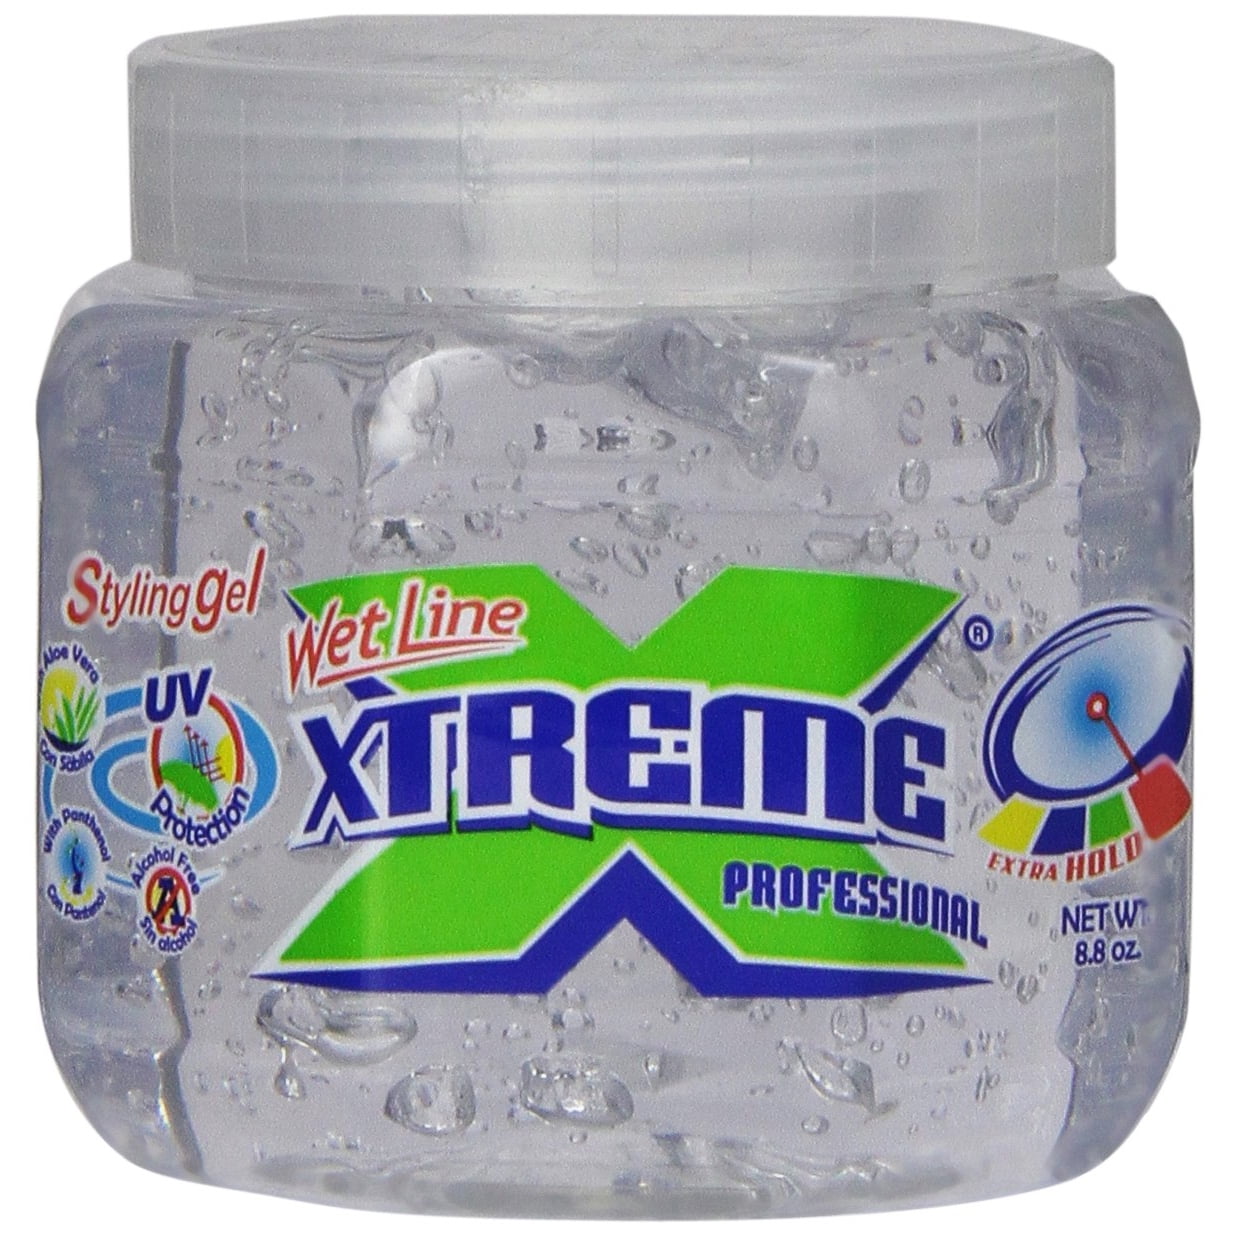 Extra clear. Wet line Xtreme Gel.